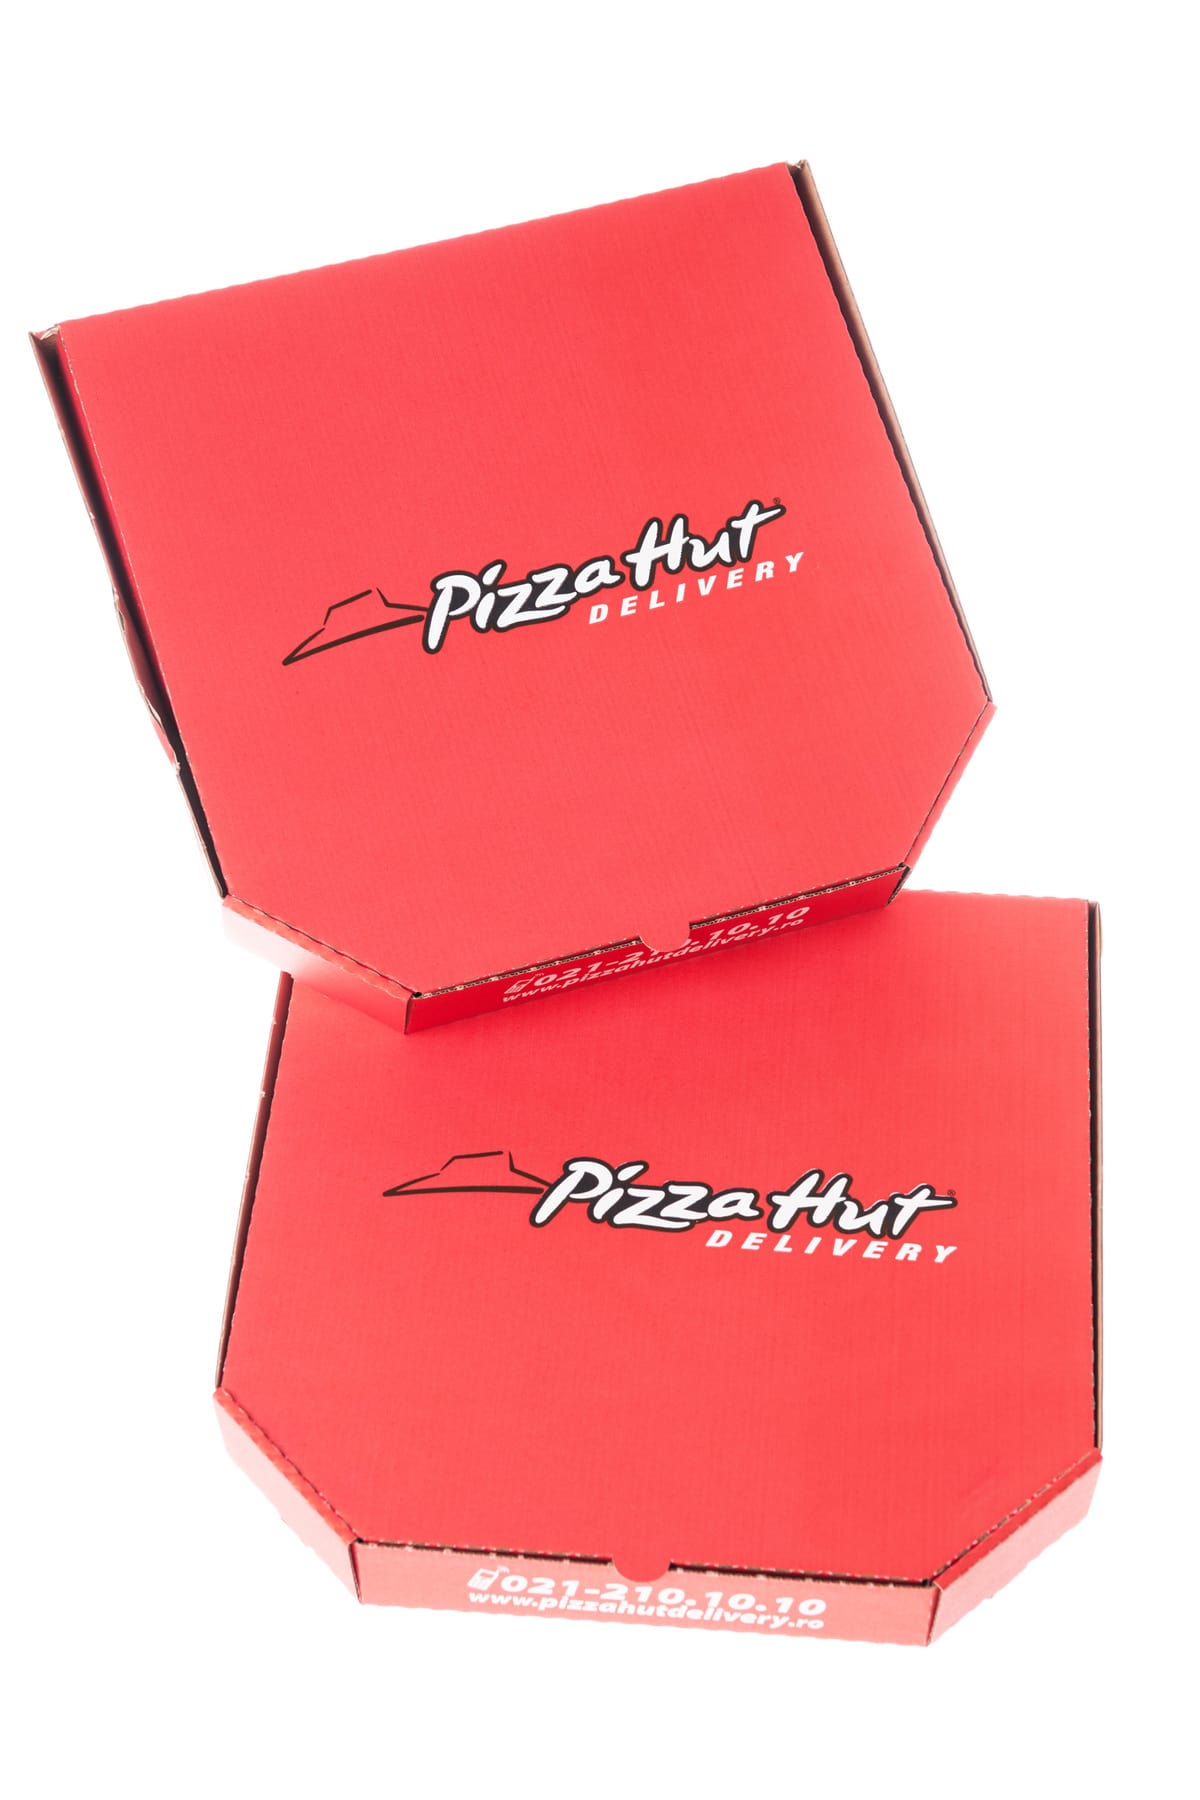 Pizza Hut delivery box with sign of Pizza Hut